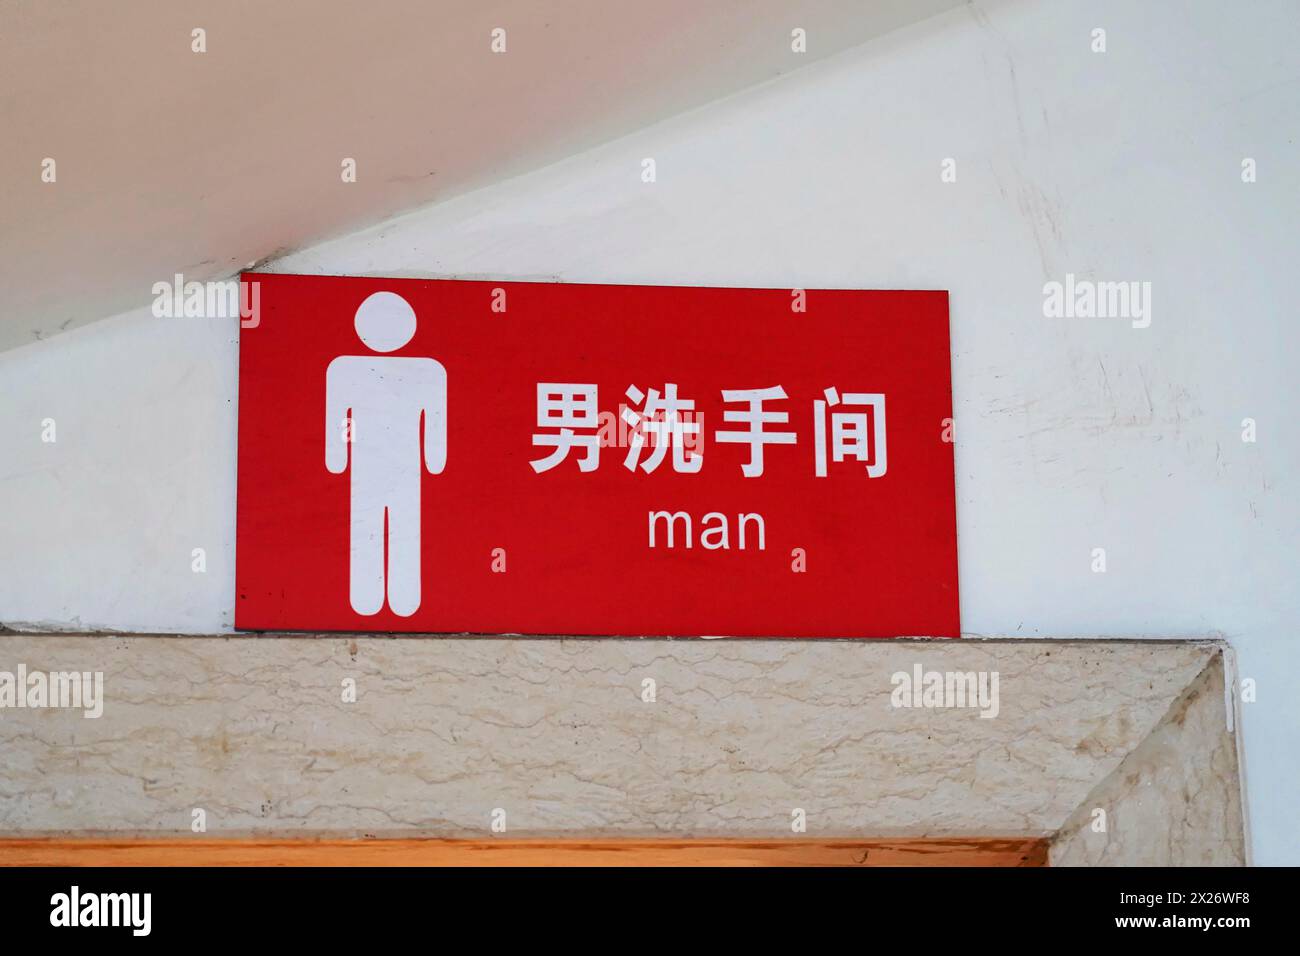 Chongqing, Chongqing Province, China, Sign for a men's toilet with Chinese characters and English translation, Chongqing, Chongqing Province, China Stock Photo